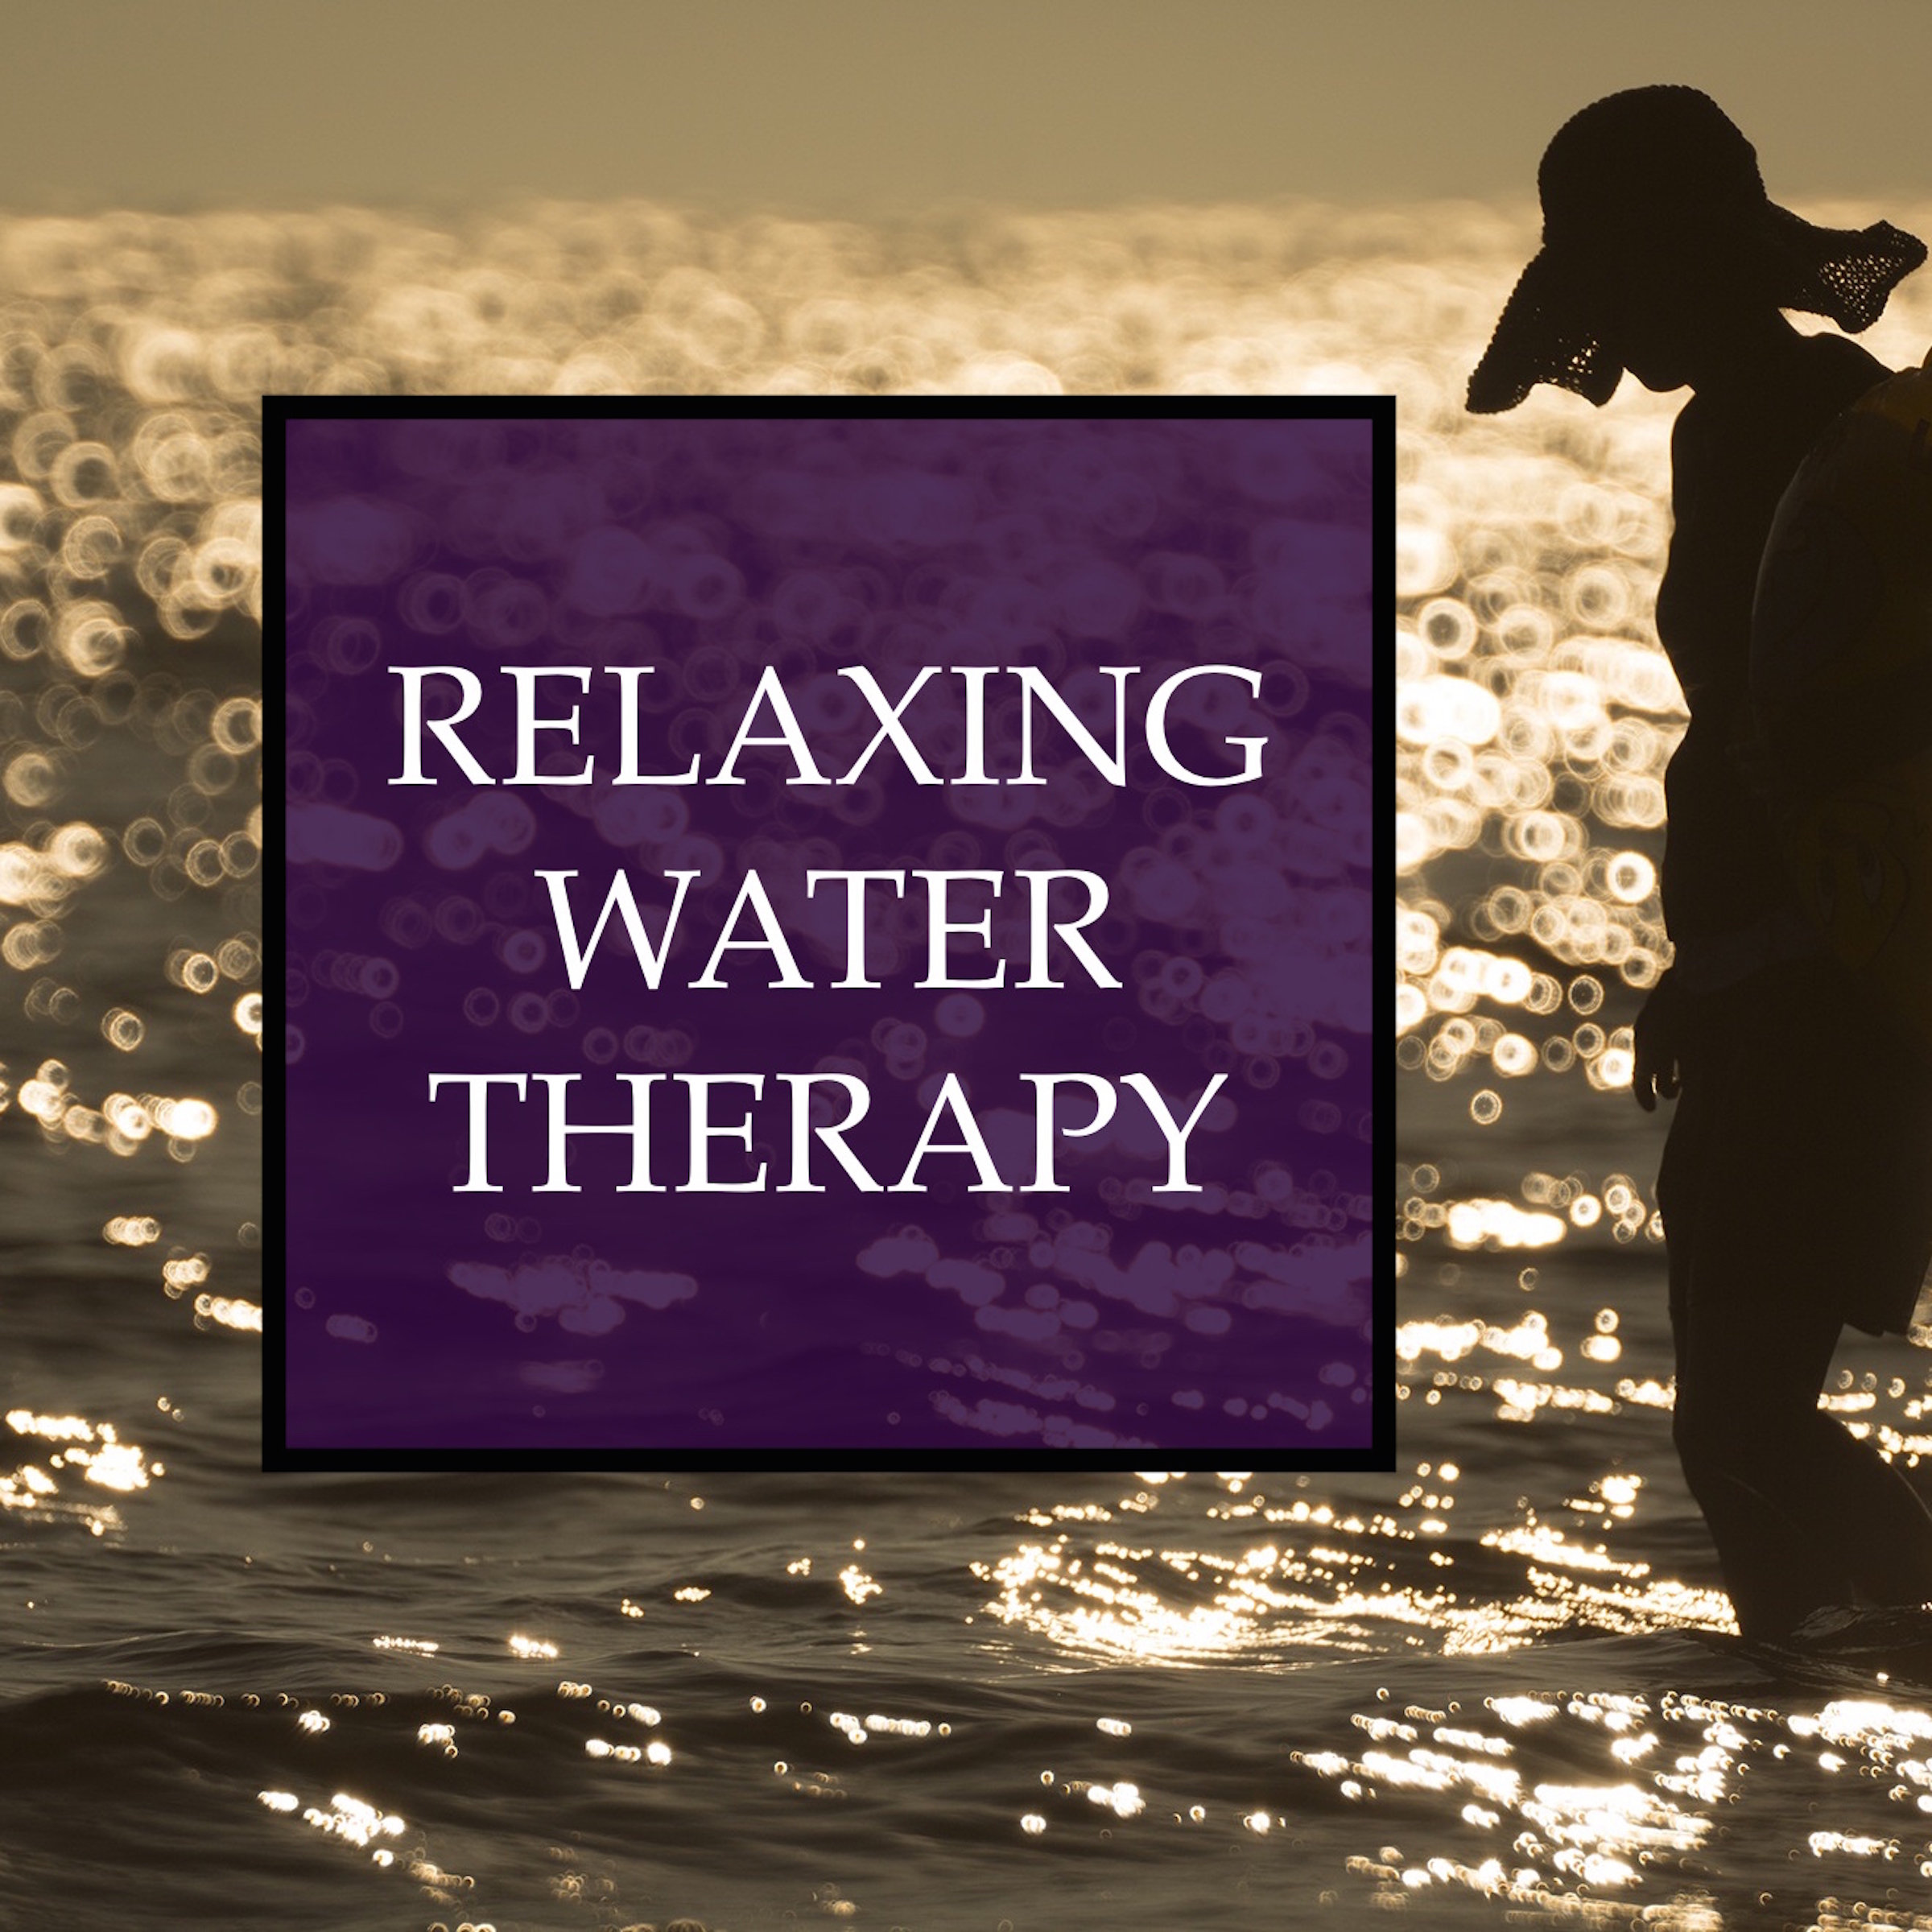 Relaxing Water Therapy - 20 Gentle Water Sounds to Help You Overcome Stress and Anxiety, and Improve Your Health Through Mindful Meditation, Relaxation, and Help with Sleeping